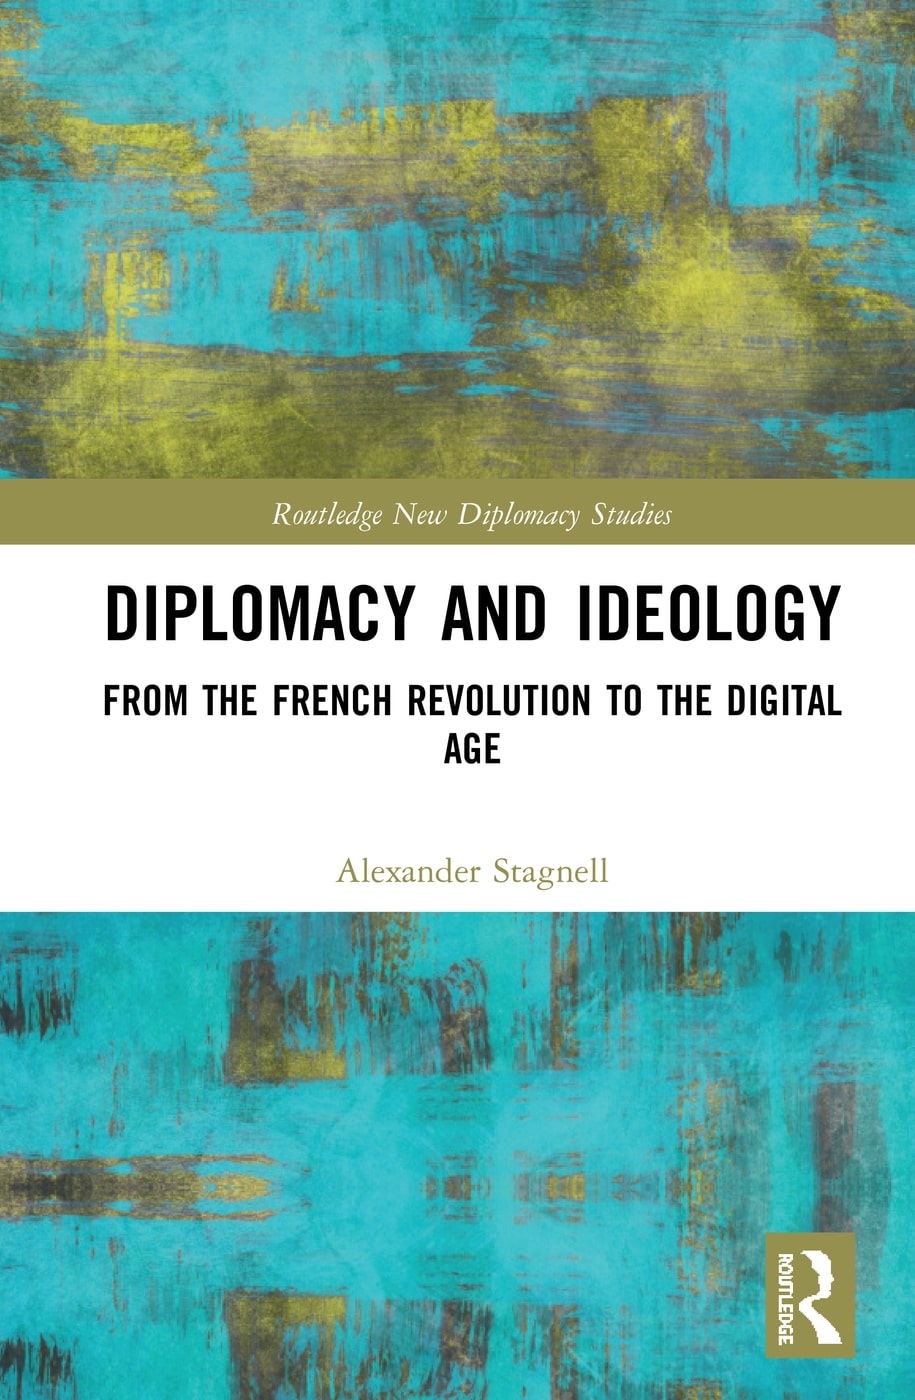 My book Diplomacy and Ideology available as eBook